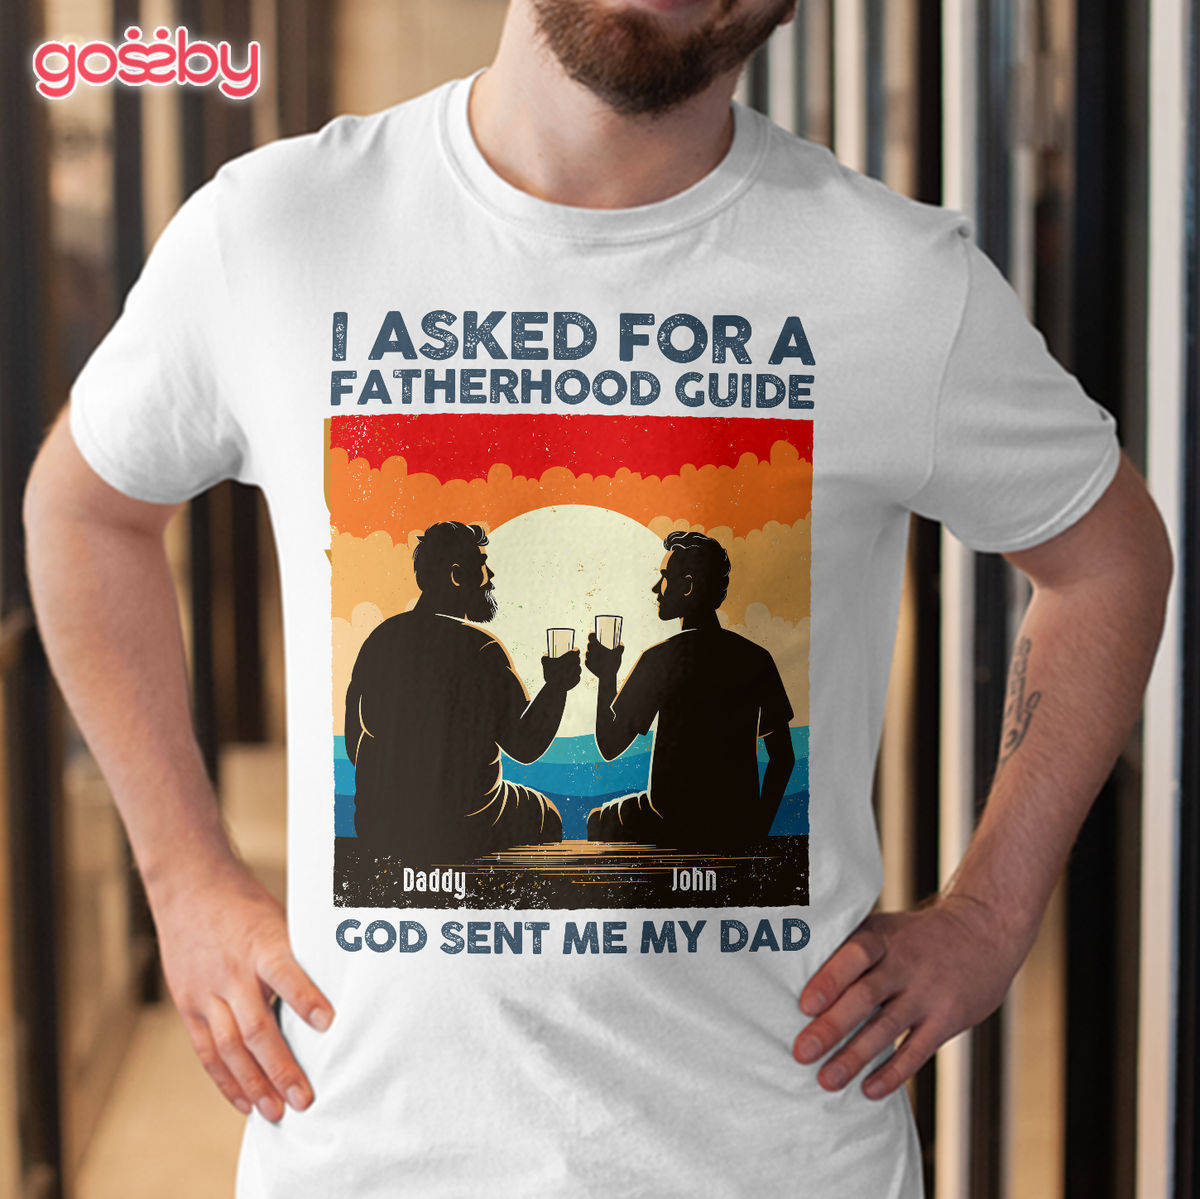 Father's Day Gifts - I asked for a fatherhood guide, God sent me my dad (44653) - Personalized Shirt